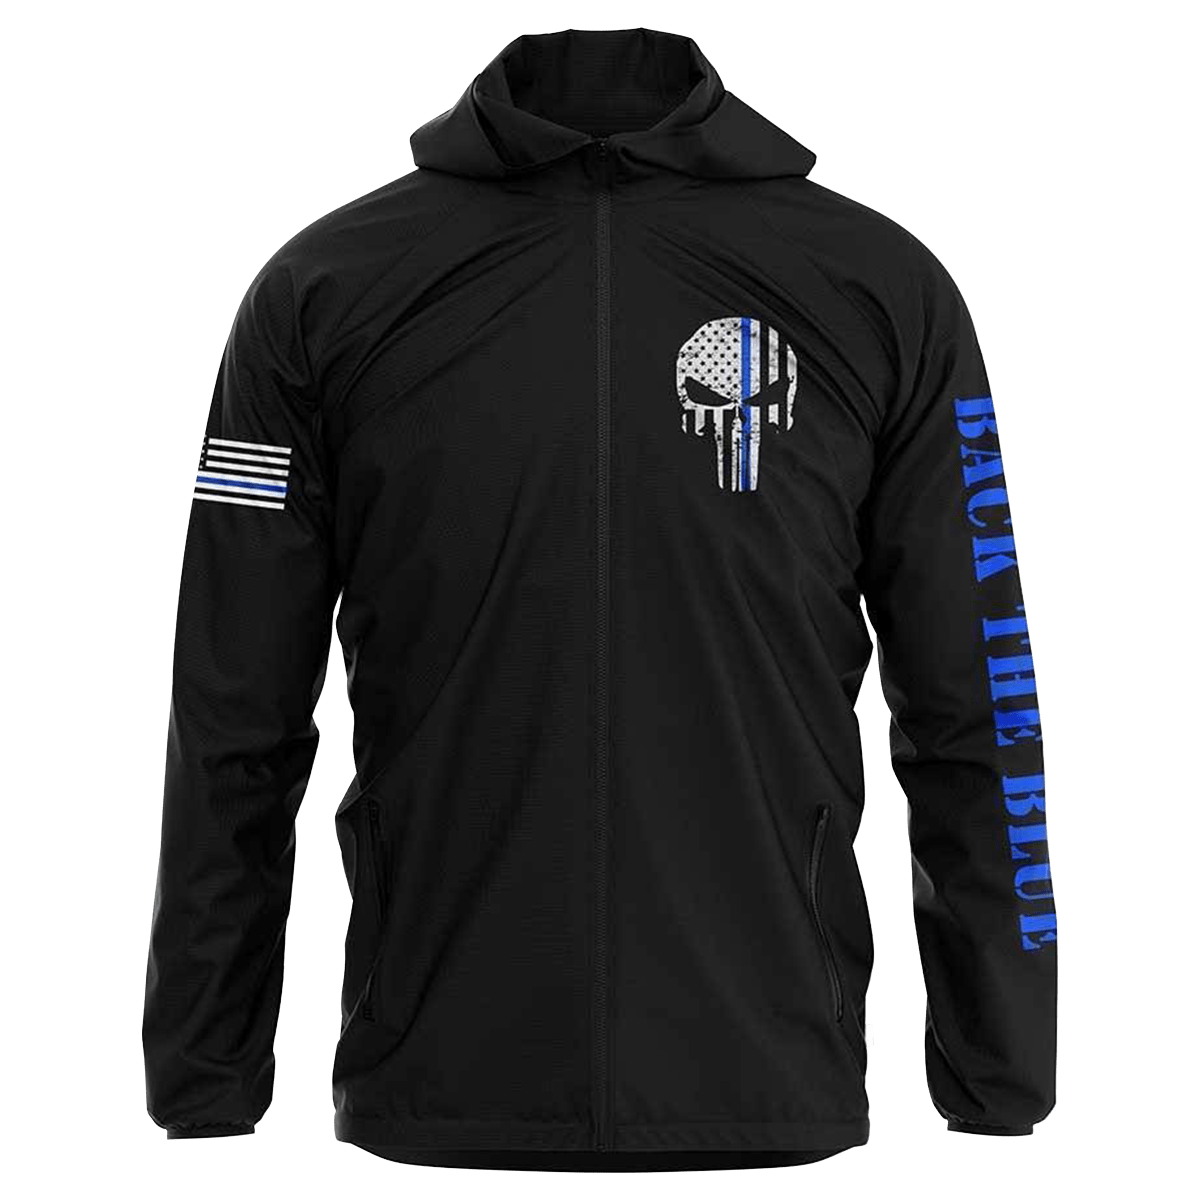 Thin Blue Line Jacket - Greater Half